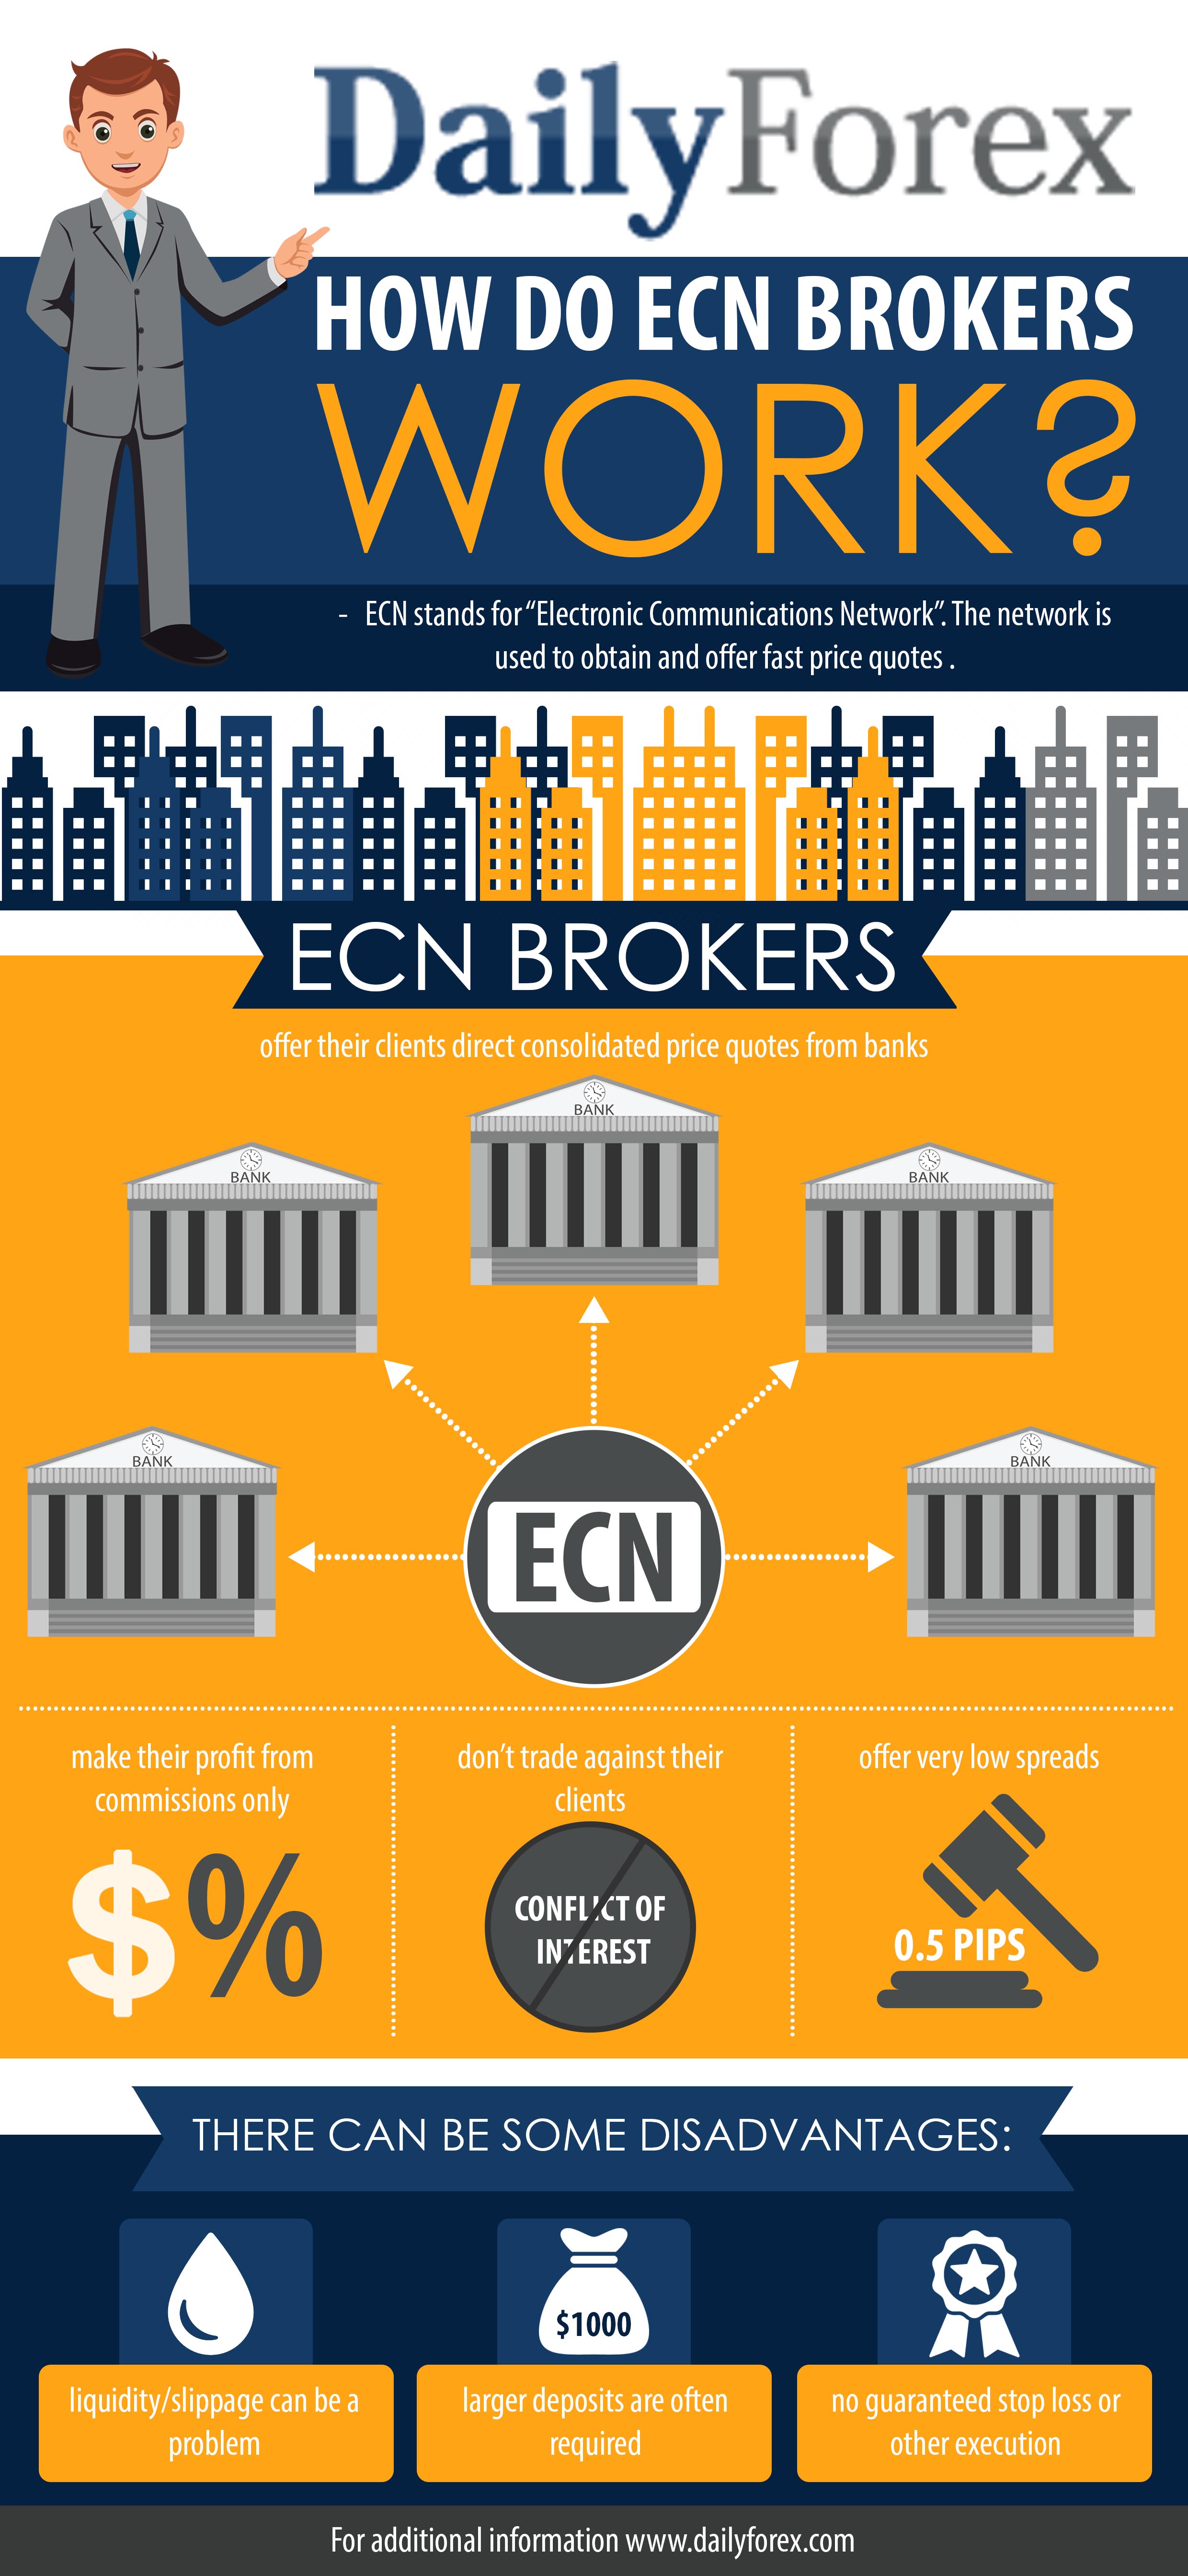 Ecn forex brokers ratings wi online sports betting